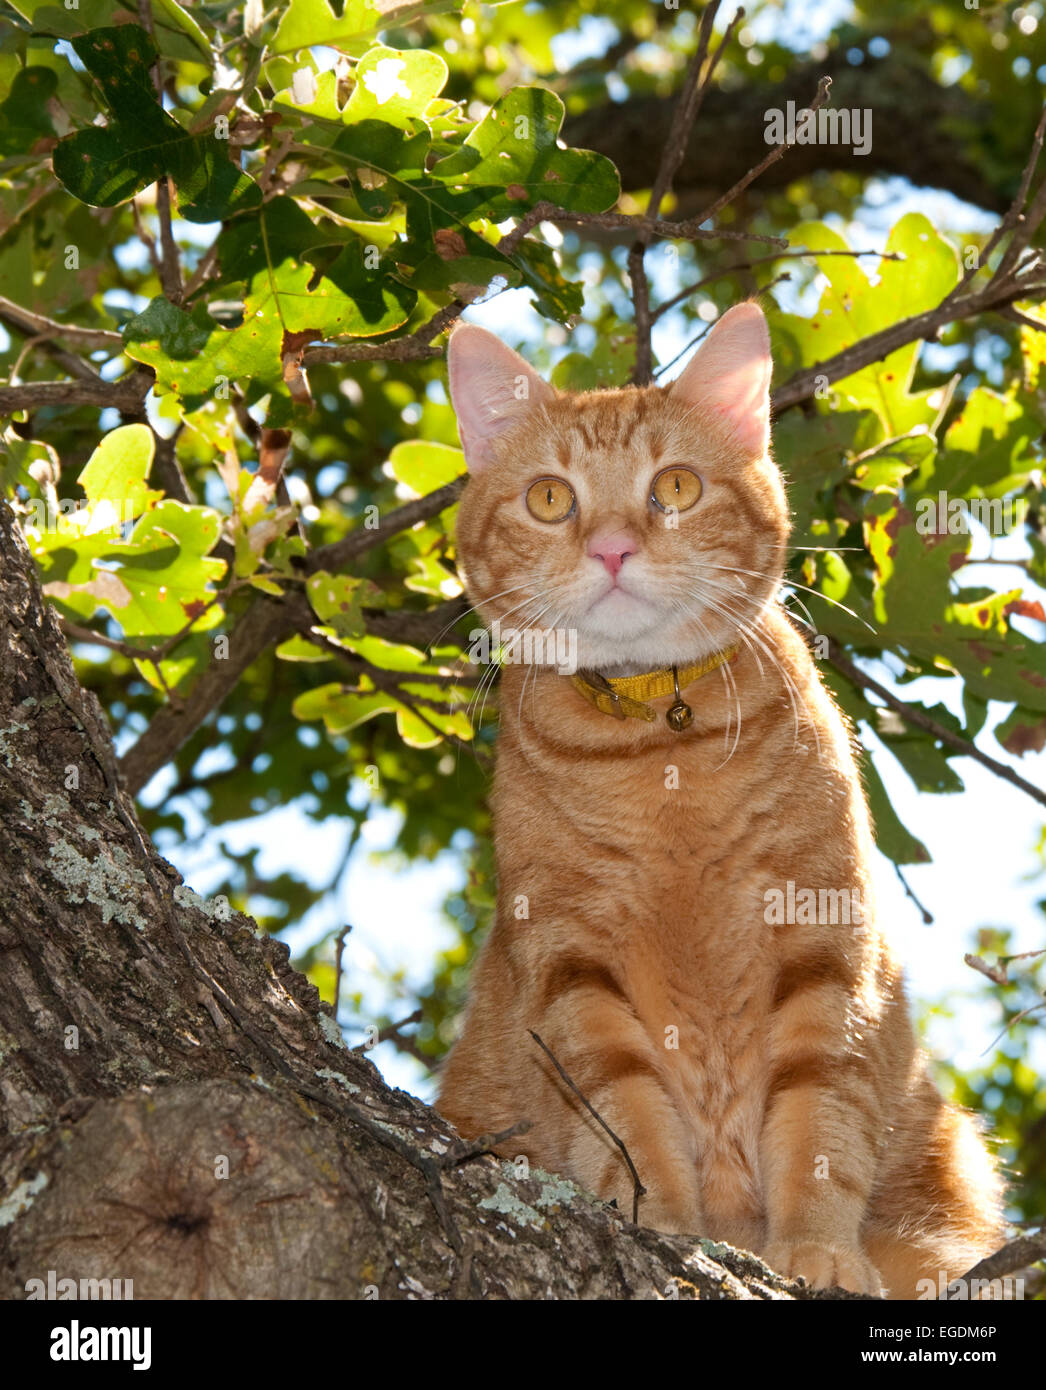 Handsome orange tabby cat up in a tree looking alert Stock Photo